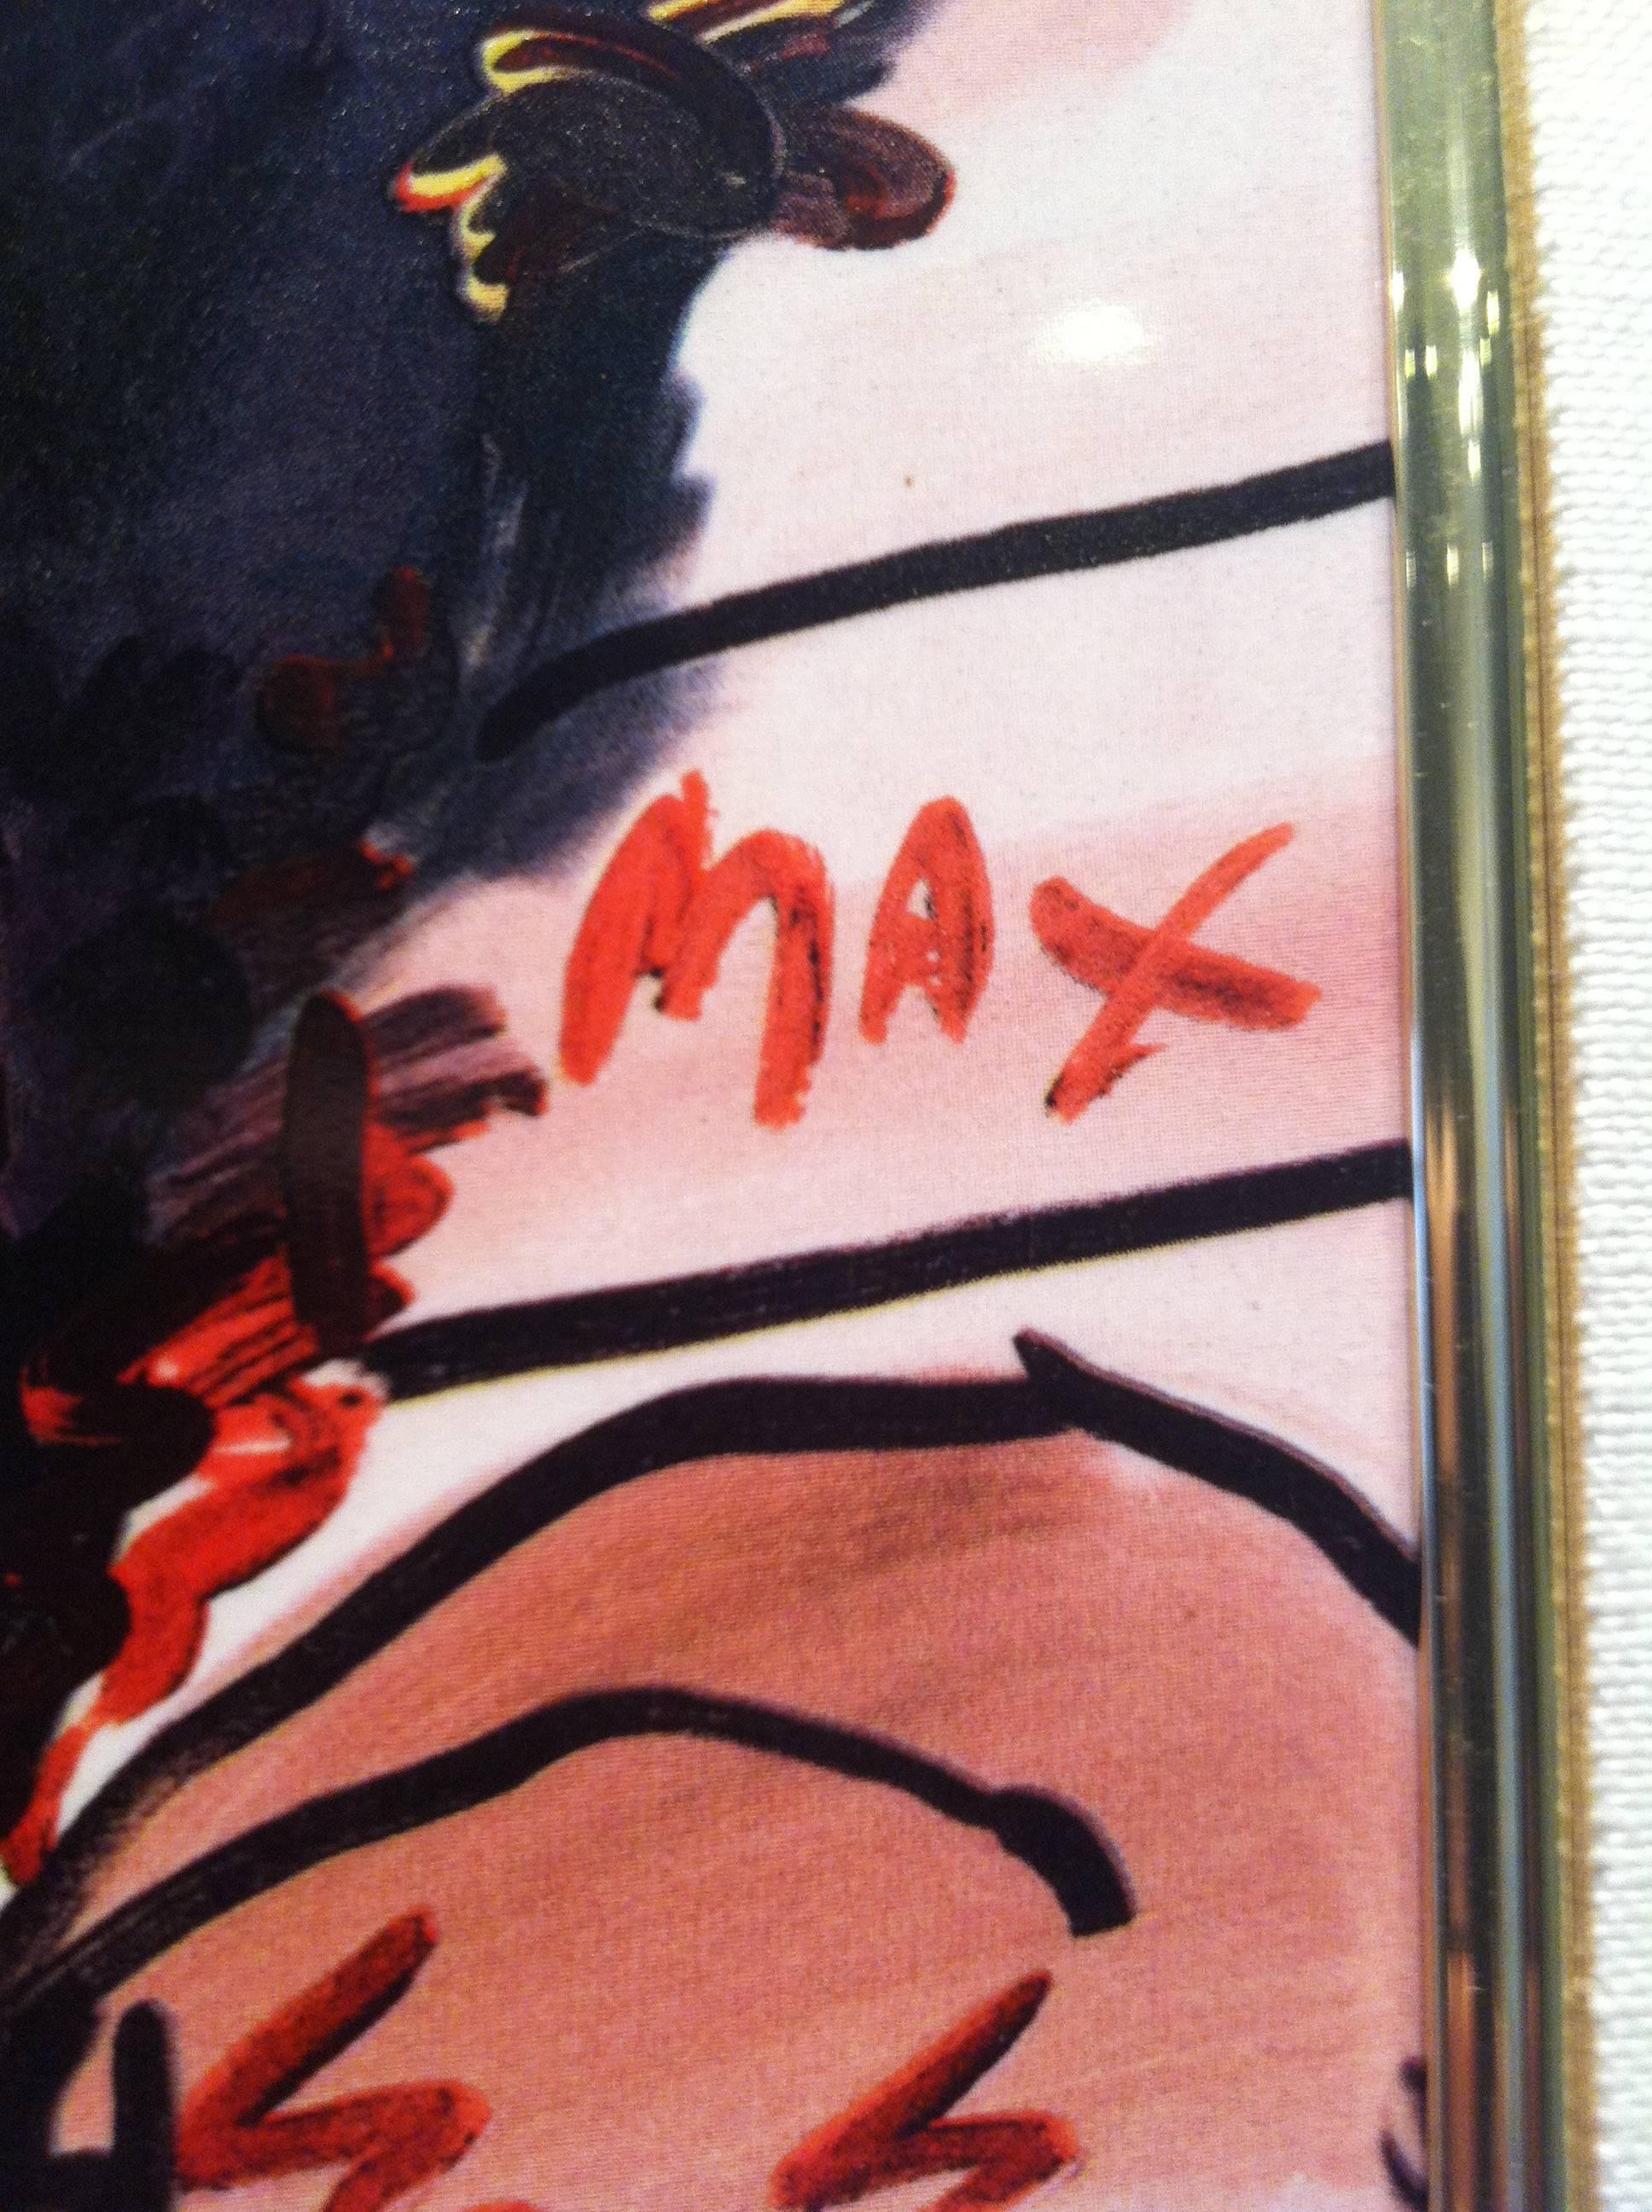 A ceramic image by renowned artist Peter Max. The painting in acrylics has a certificate of authenticity on the back and is signed by the artist on the front.